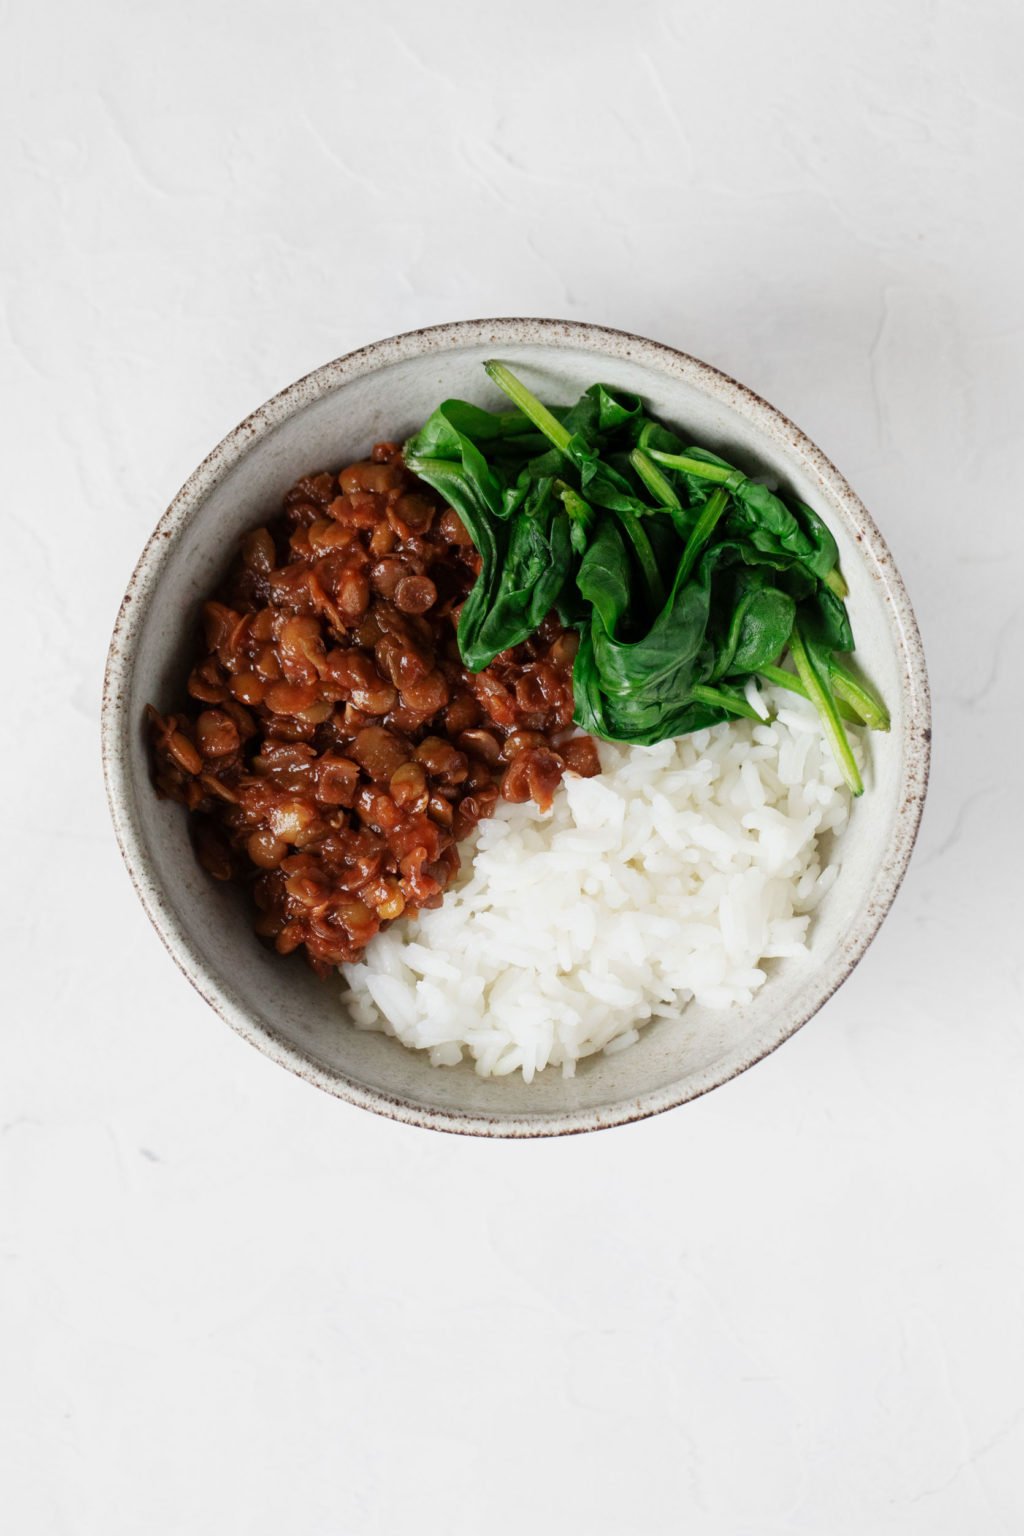 A white and gray hued bowl is filled with legumes, rice, and steamed baby spinach.